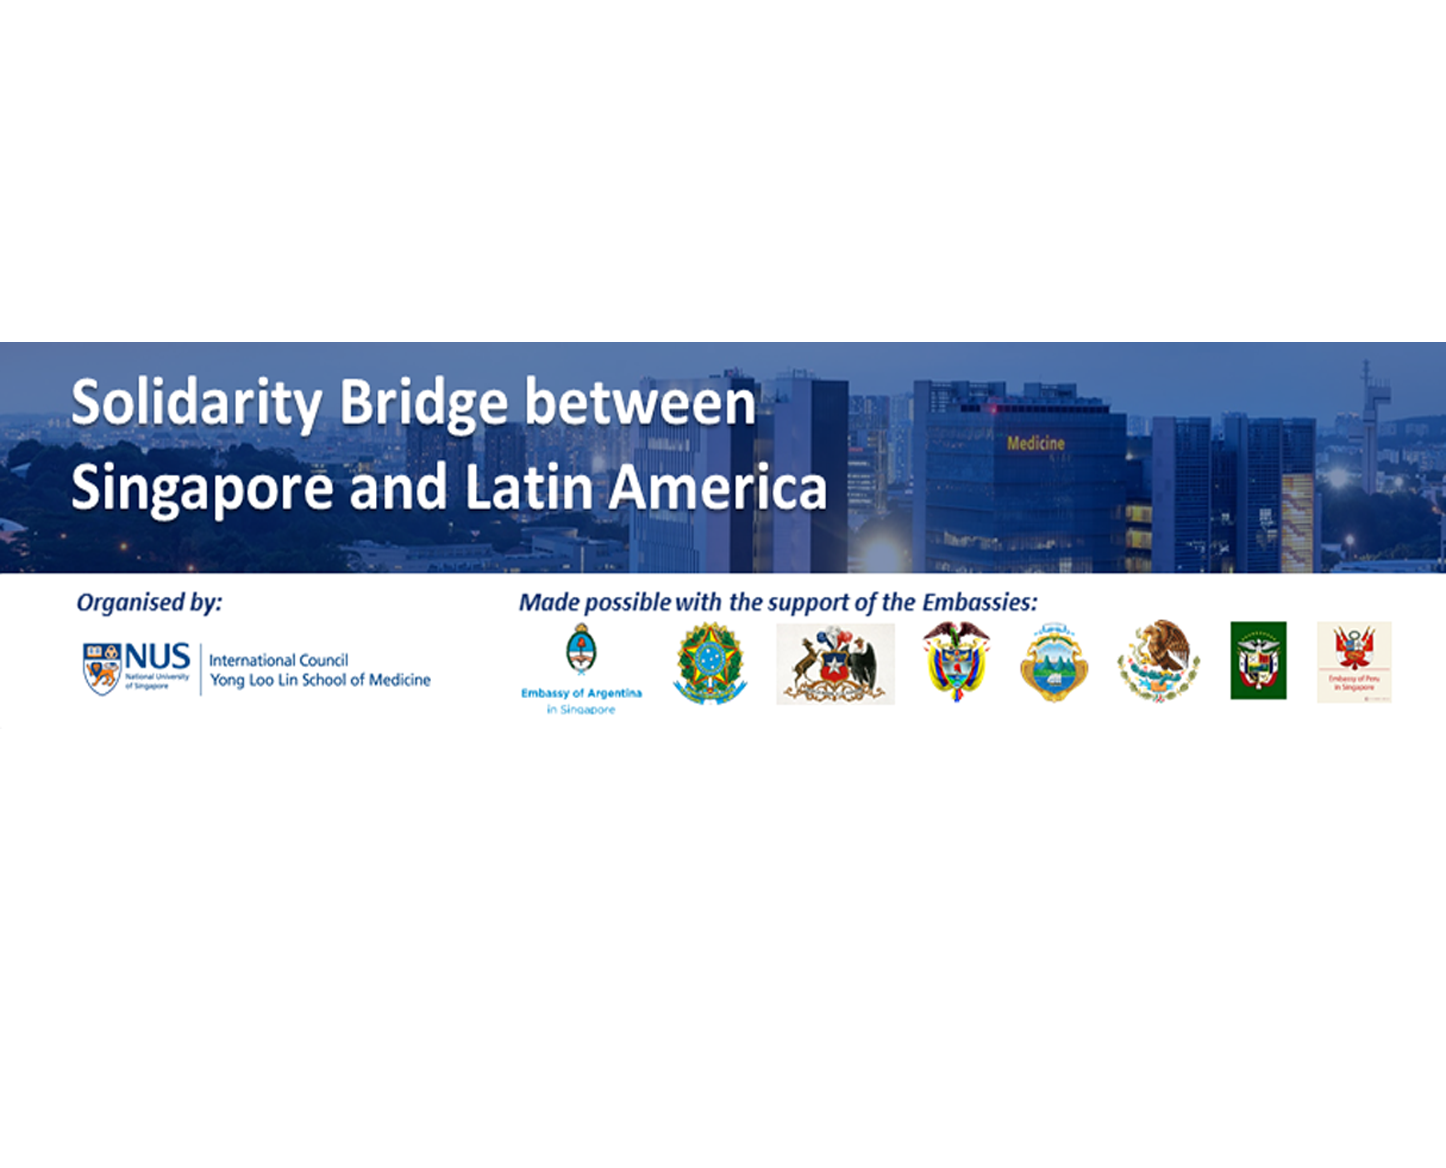 Solidarity Bridge Session 1 – How an academic infectious diseases division mobilised in Singapore